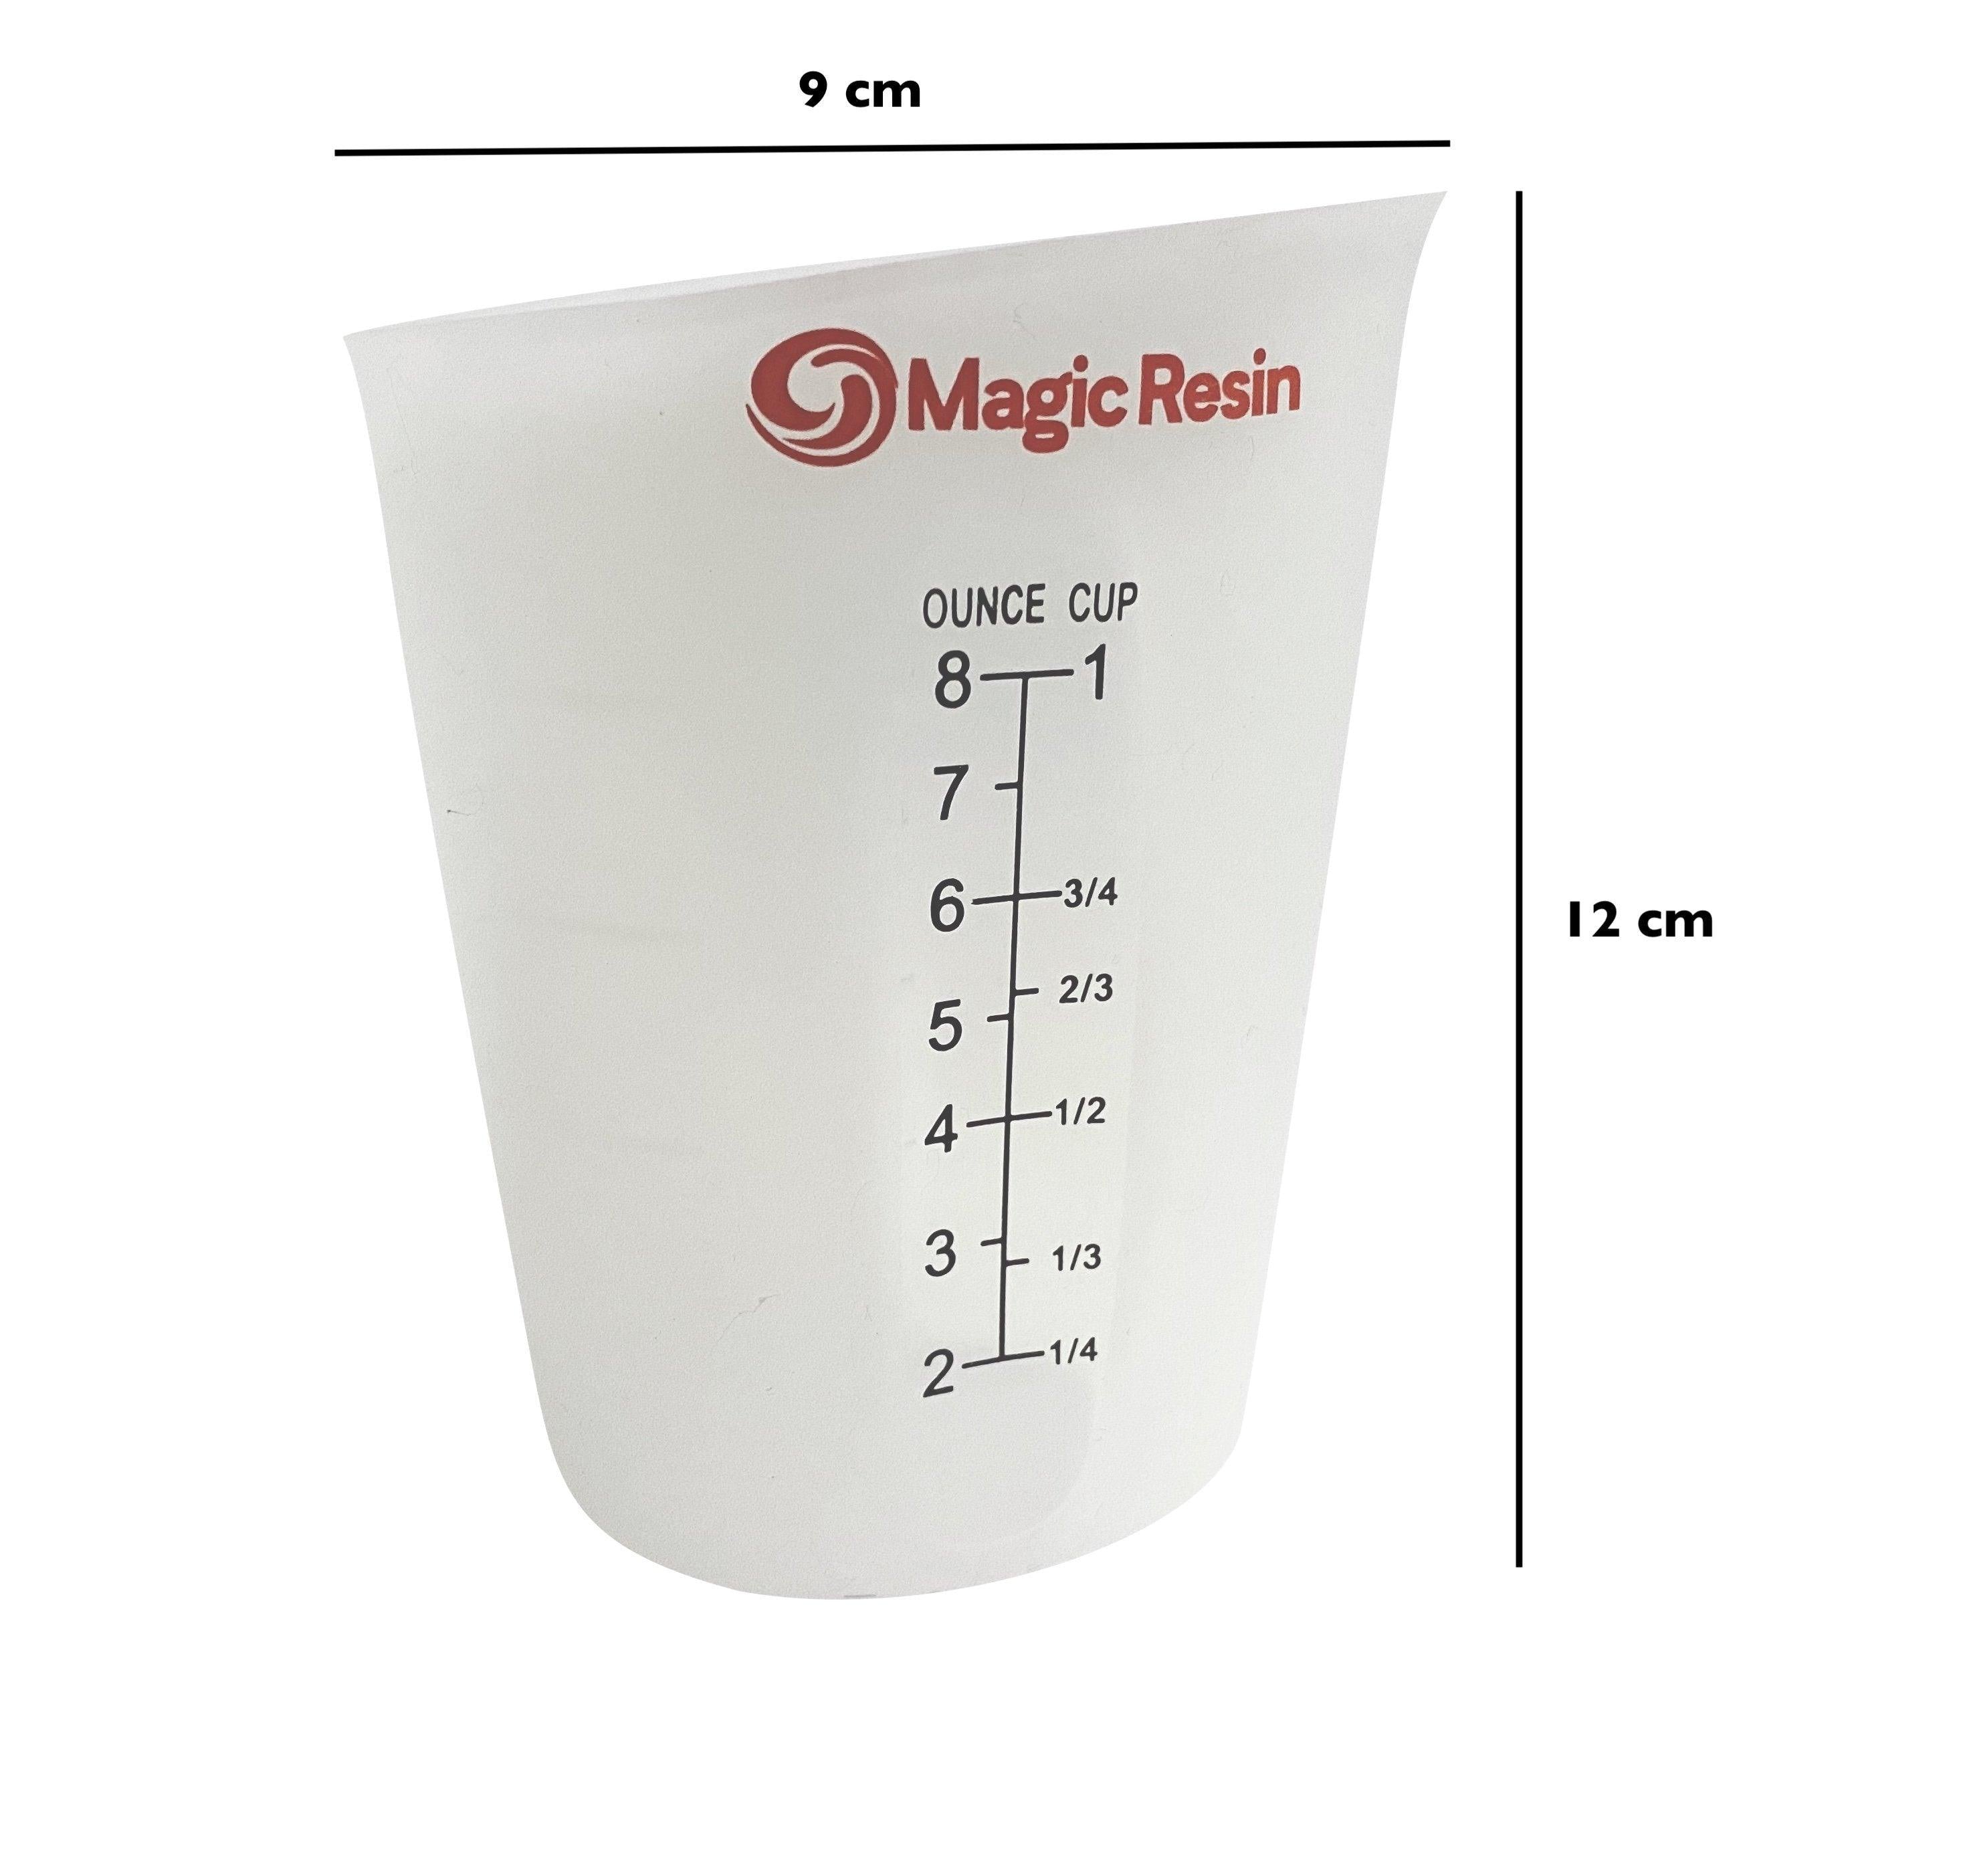 Silicone Measuring Cups | 2 x 500ml & 2 x 250ml | Great for Epoxy Resin Mixing | Set of 4 Cups - Magic Resin USA